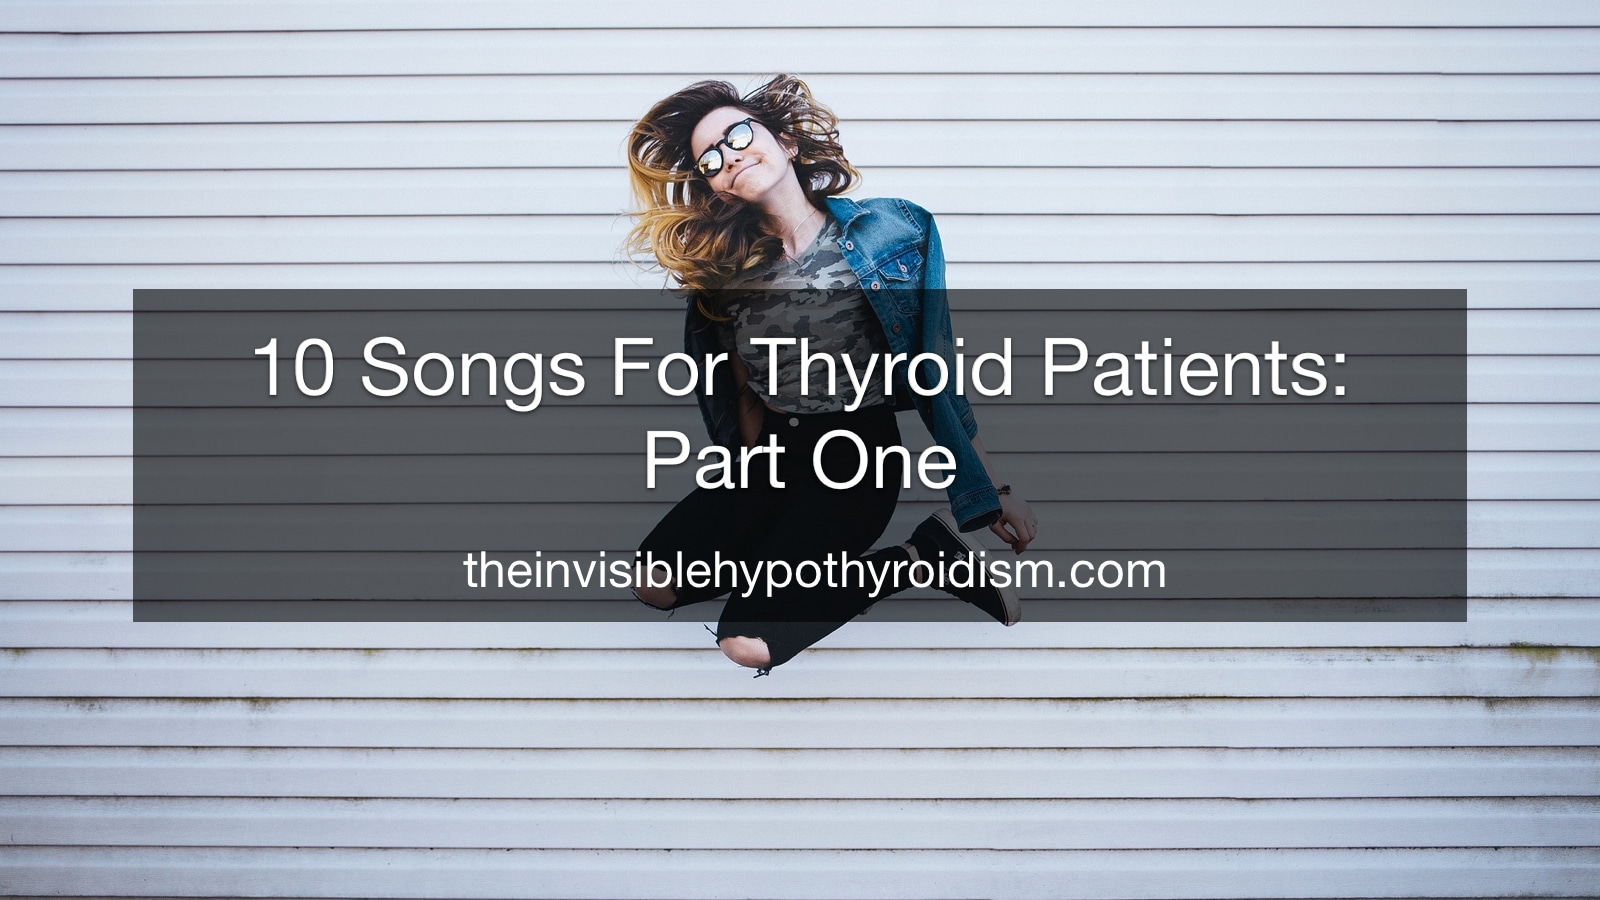 10 Songs For Thyroid Patients: Part One